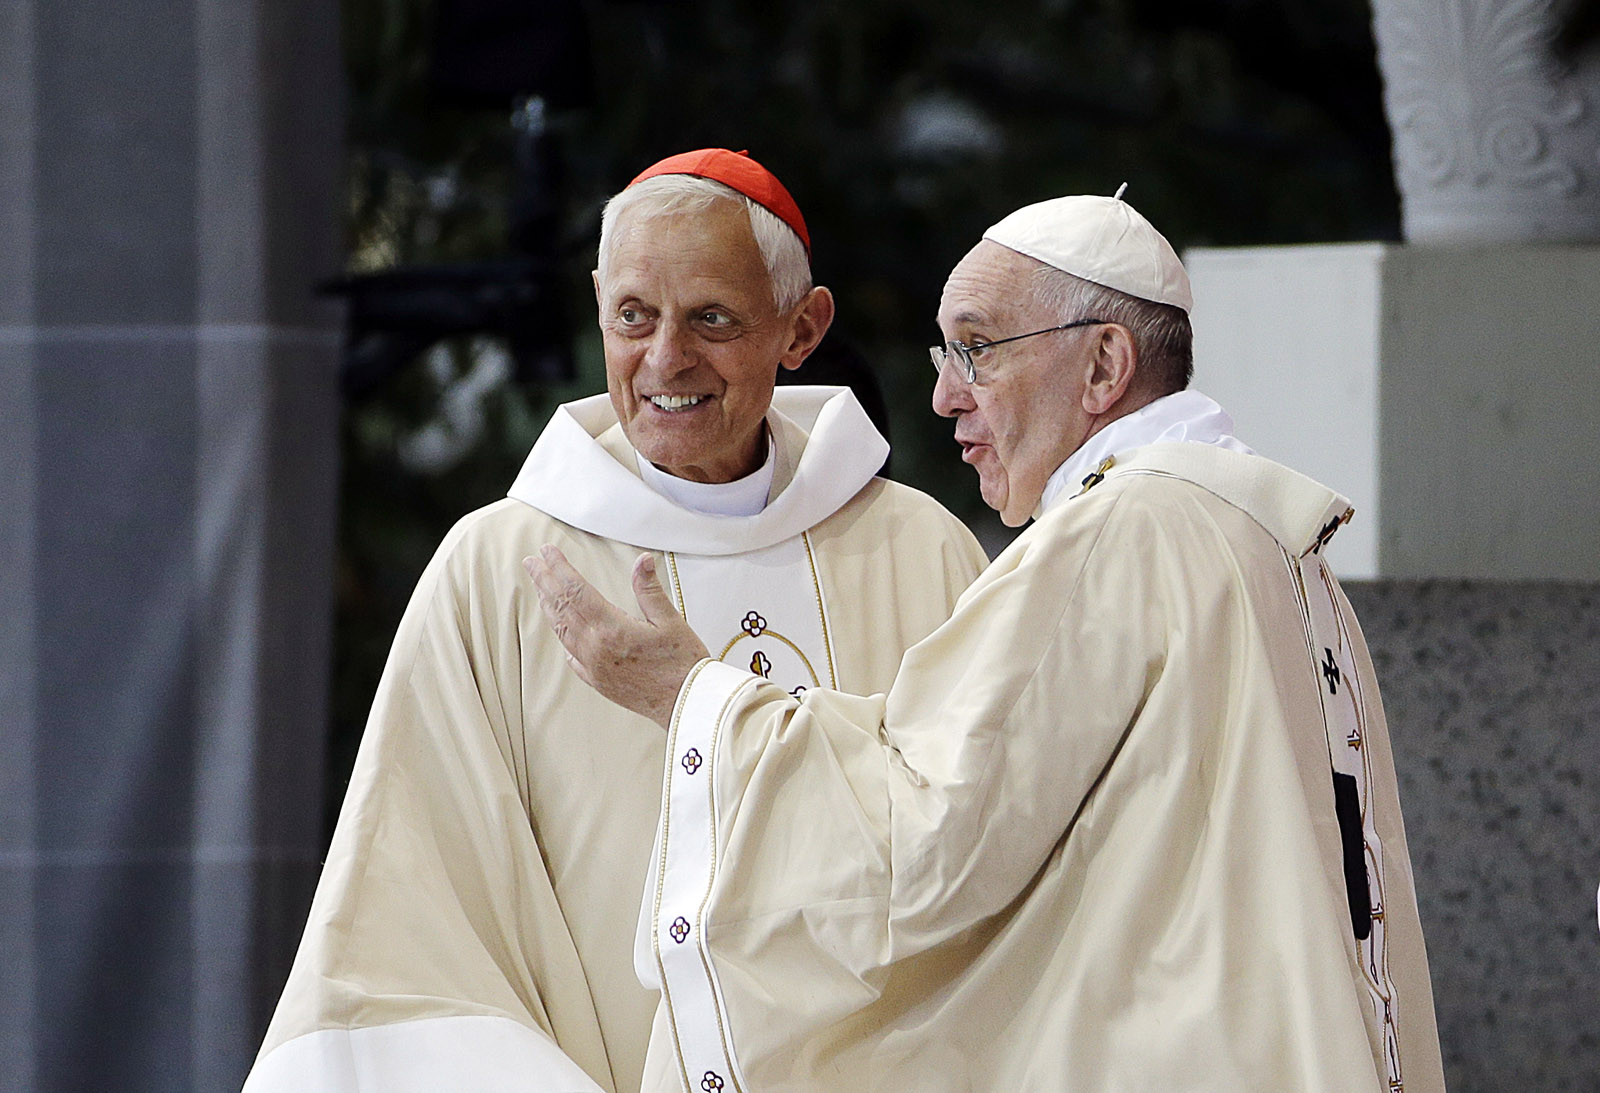 Cardinal Donald Wuerl, archbishop of Washington. left, looks toward the crowd with Pope Francis following a Mass outside the Basilica of the National Shrine of the Immaculate Conception Wednesday, Sept. 23, 2015, in Washington. (AP Photo/David Goldman)